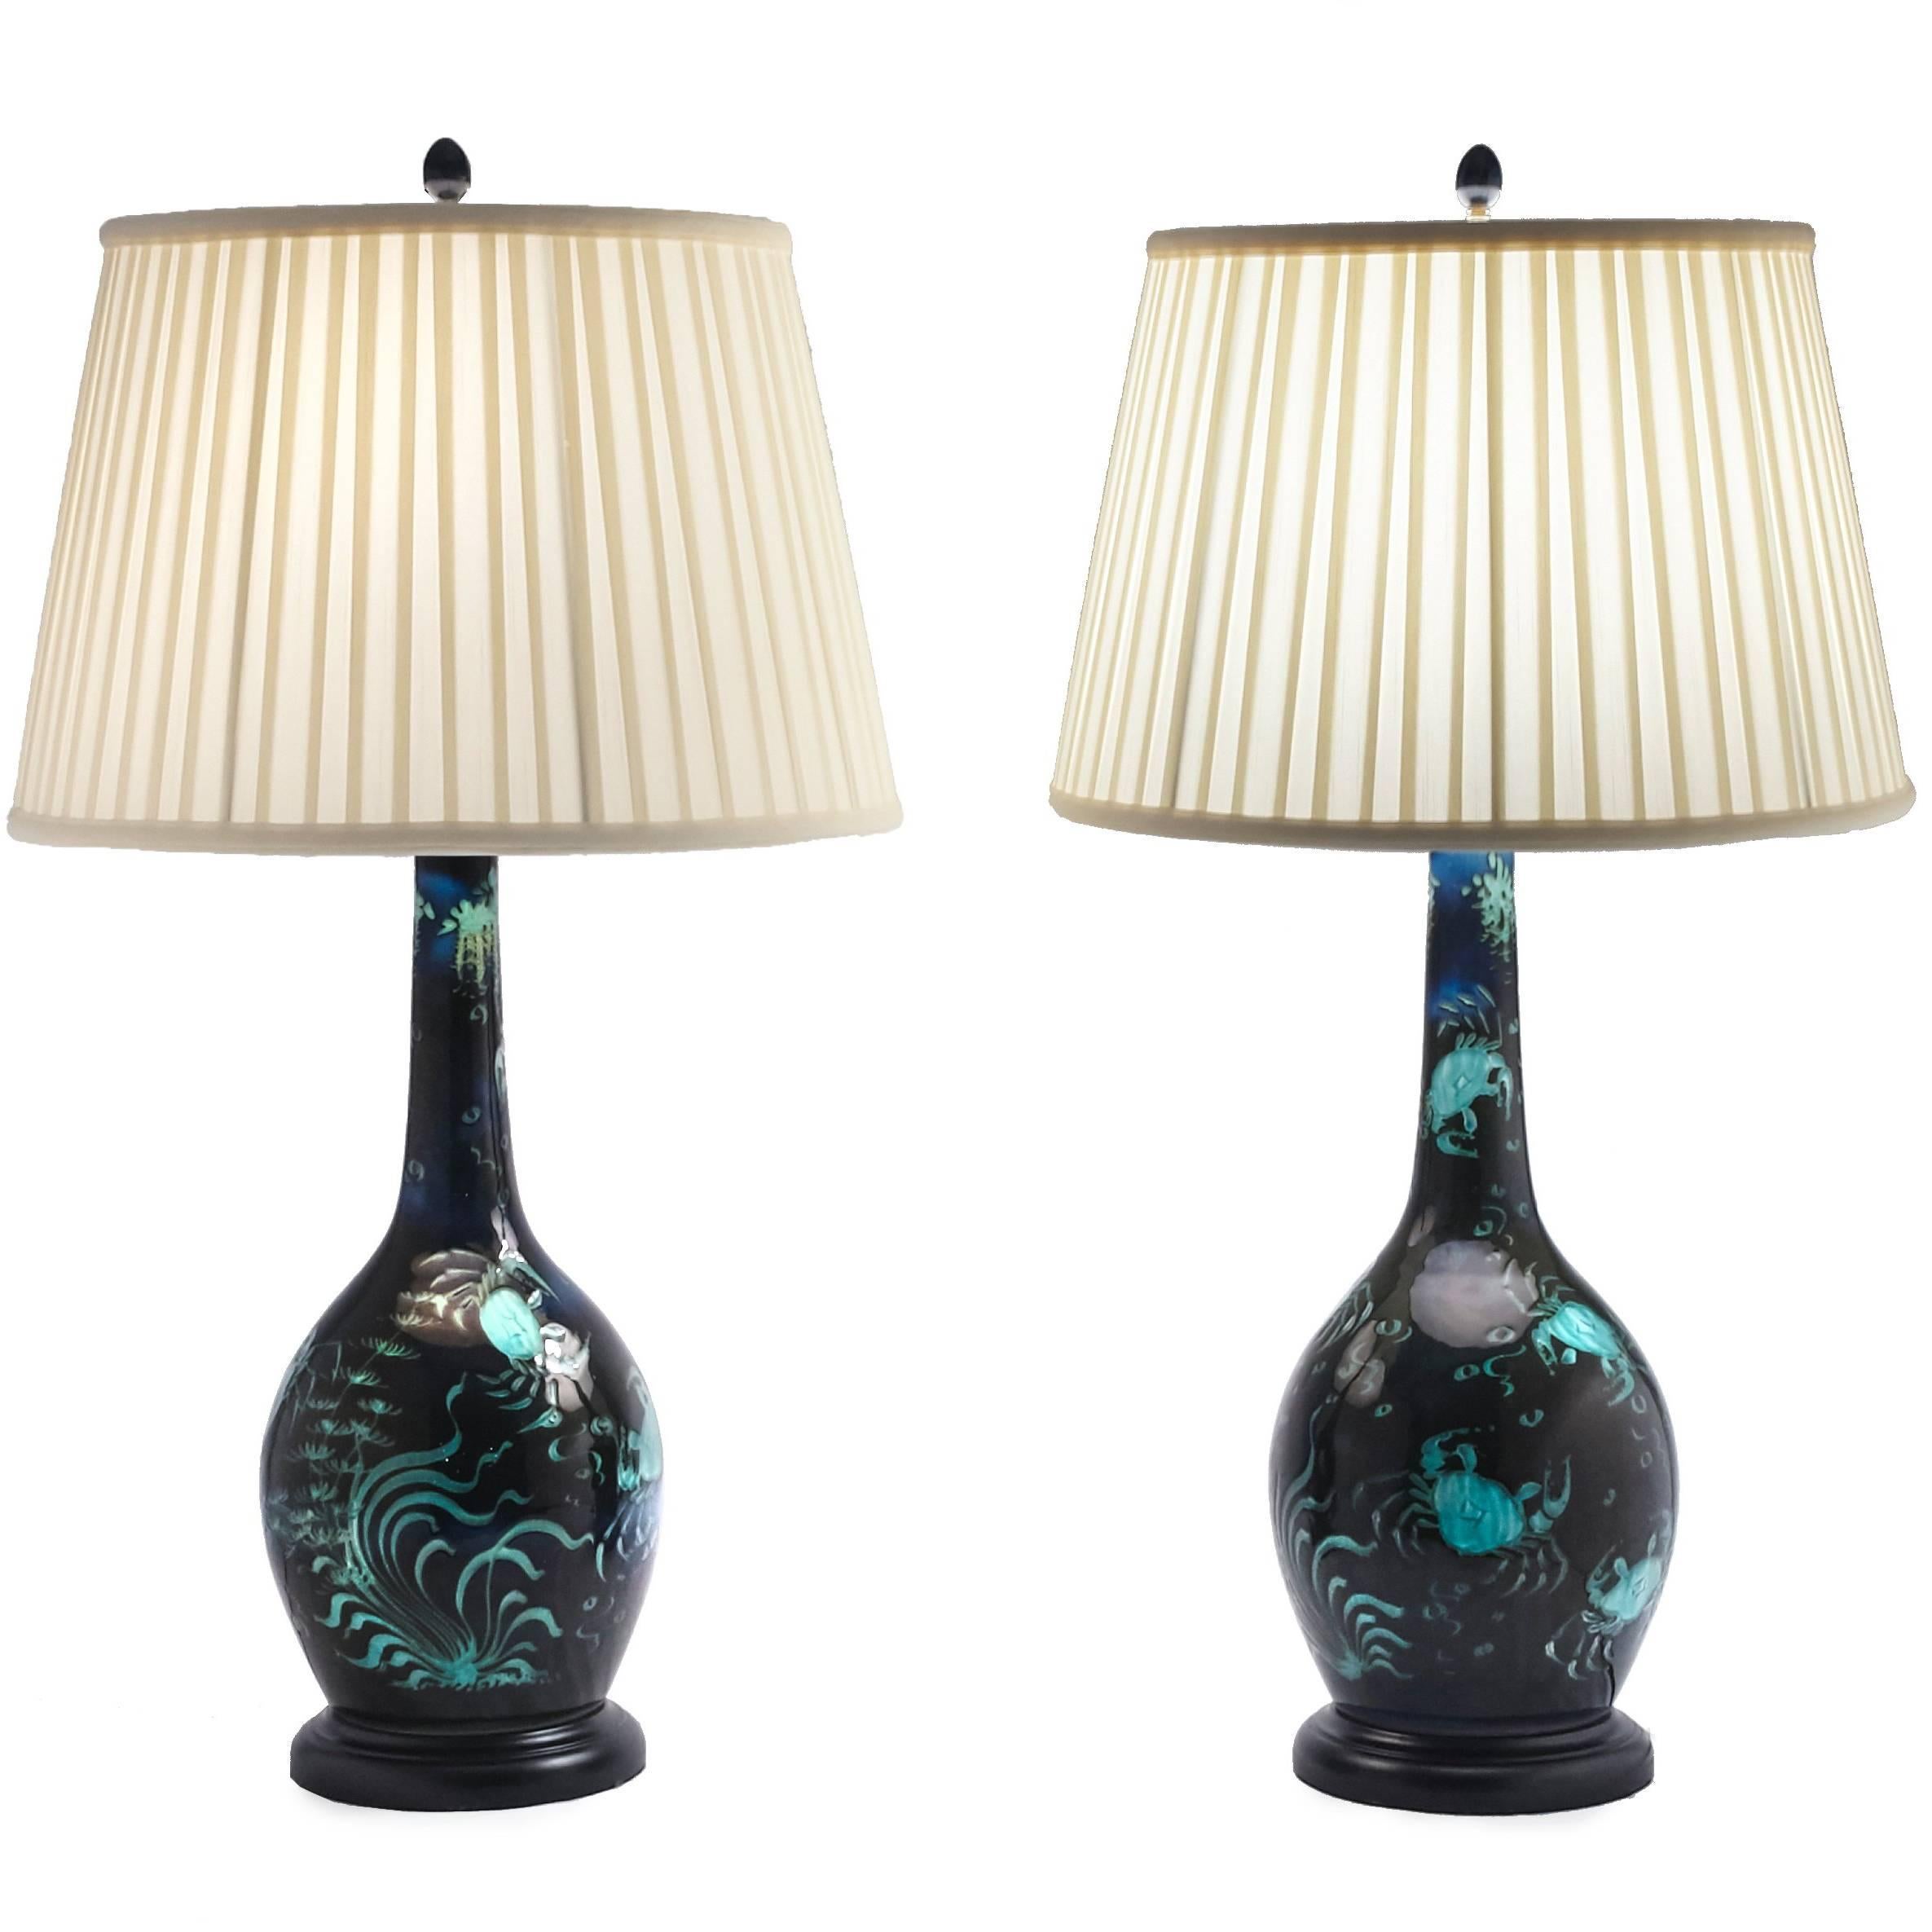 Pair of Deep Blue Ceramic Lamps with Turquoise Green Crabs and Ocean Plants